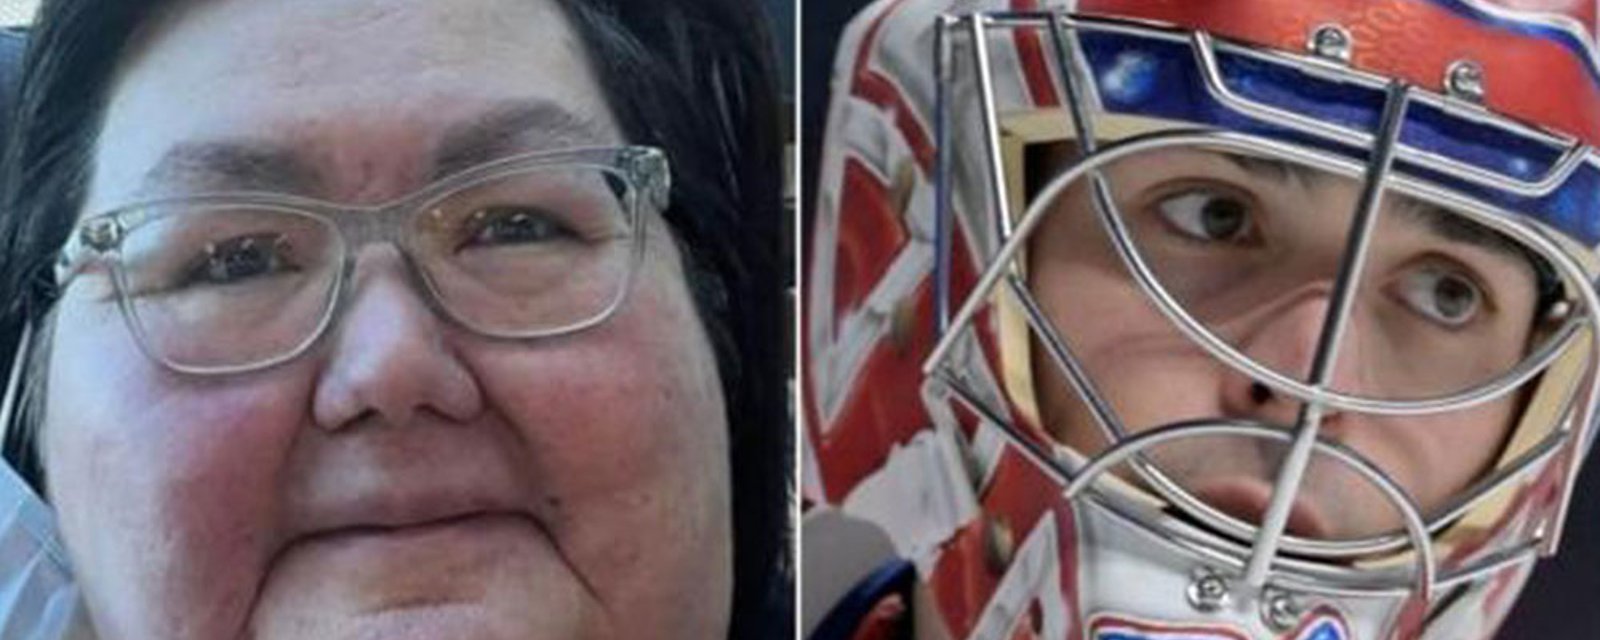 Carey Price surprises Cree woman suffering from cancer